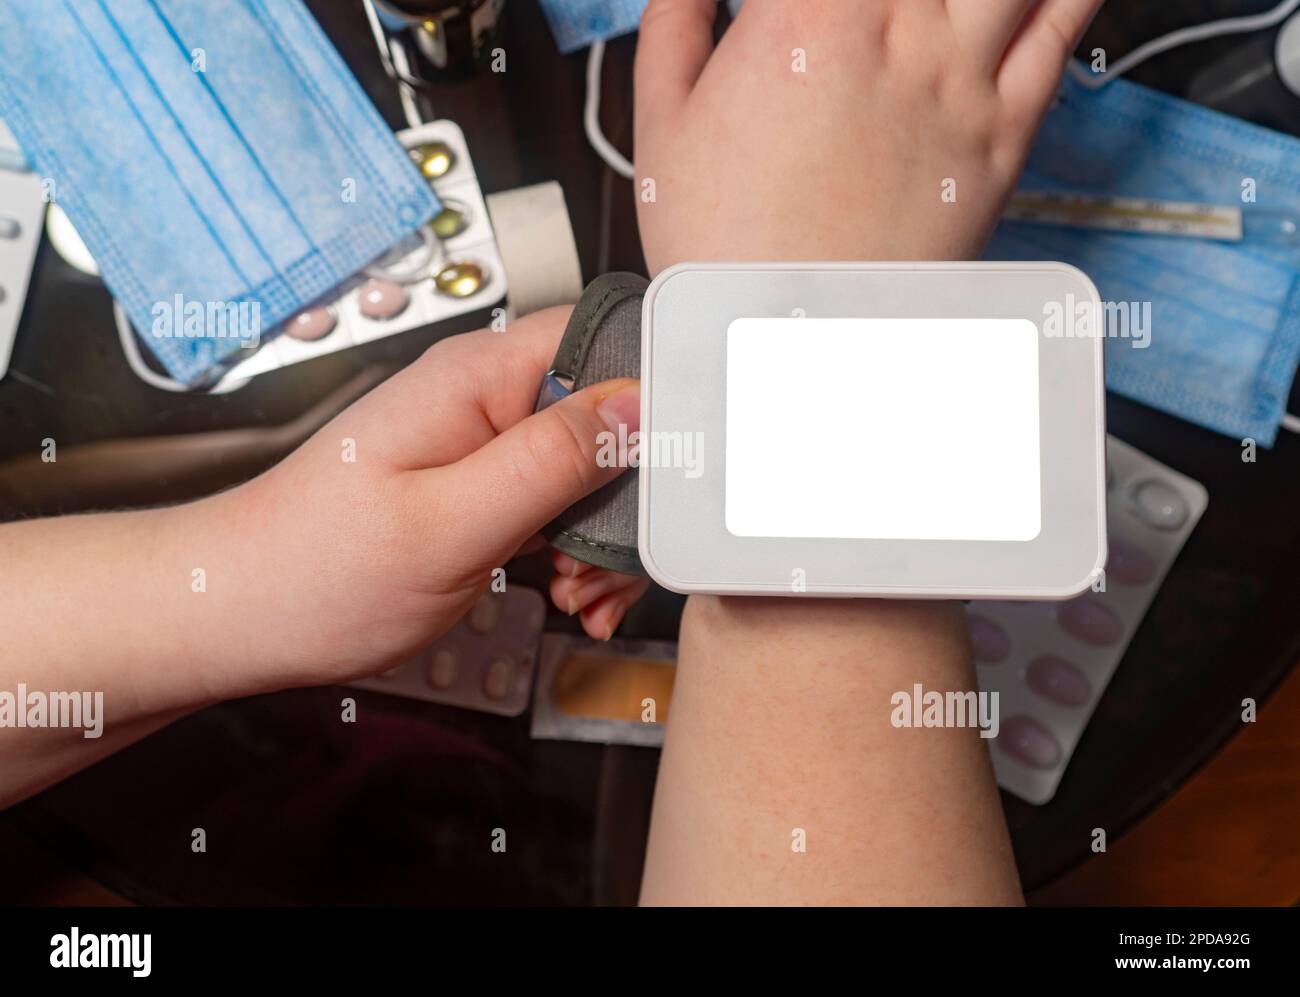 Blood pressure monitor with a clean screen on arm against background of a table with medicines (close-up). Concept of medicine and home treatment Stock Photo